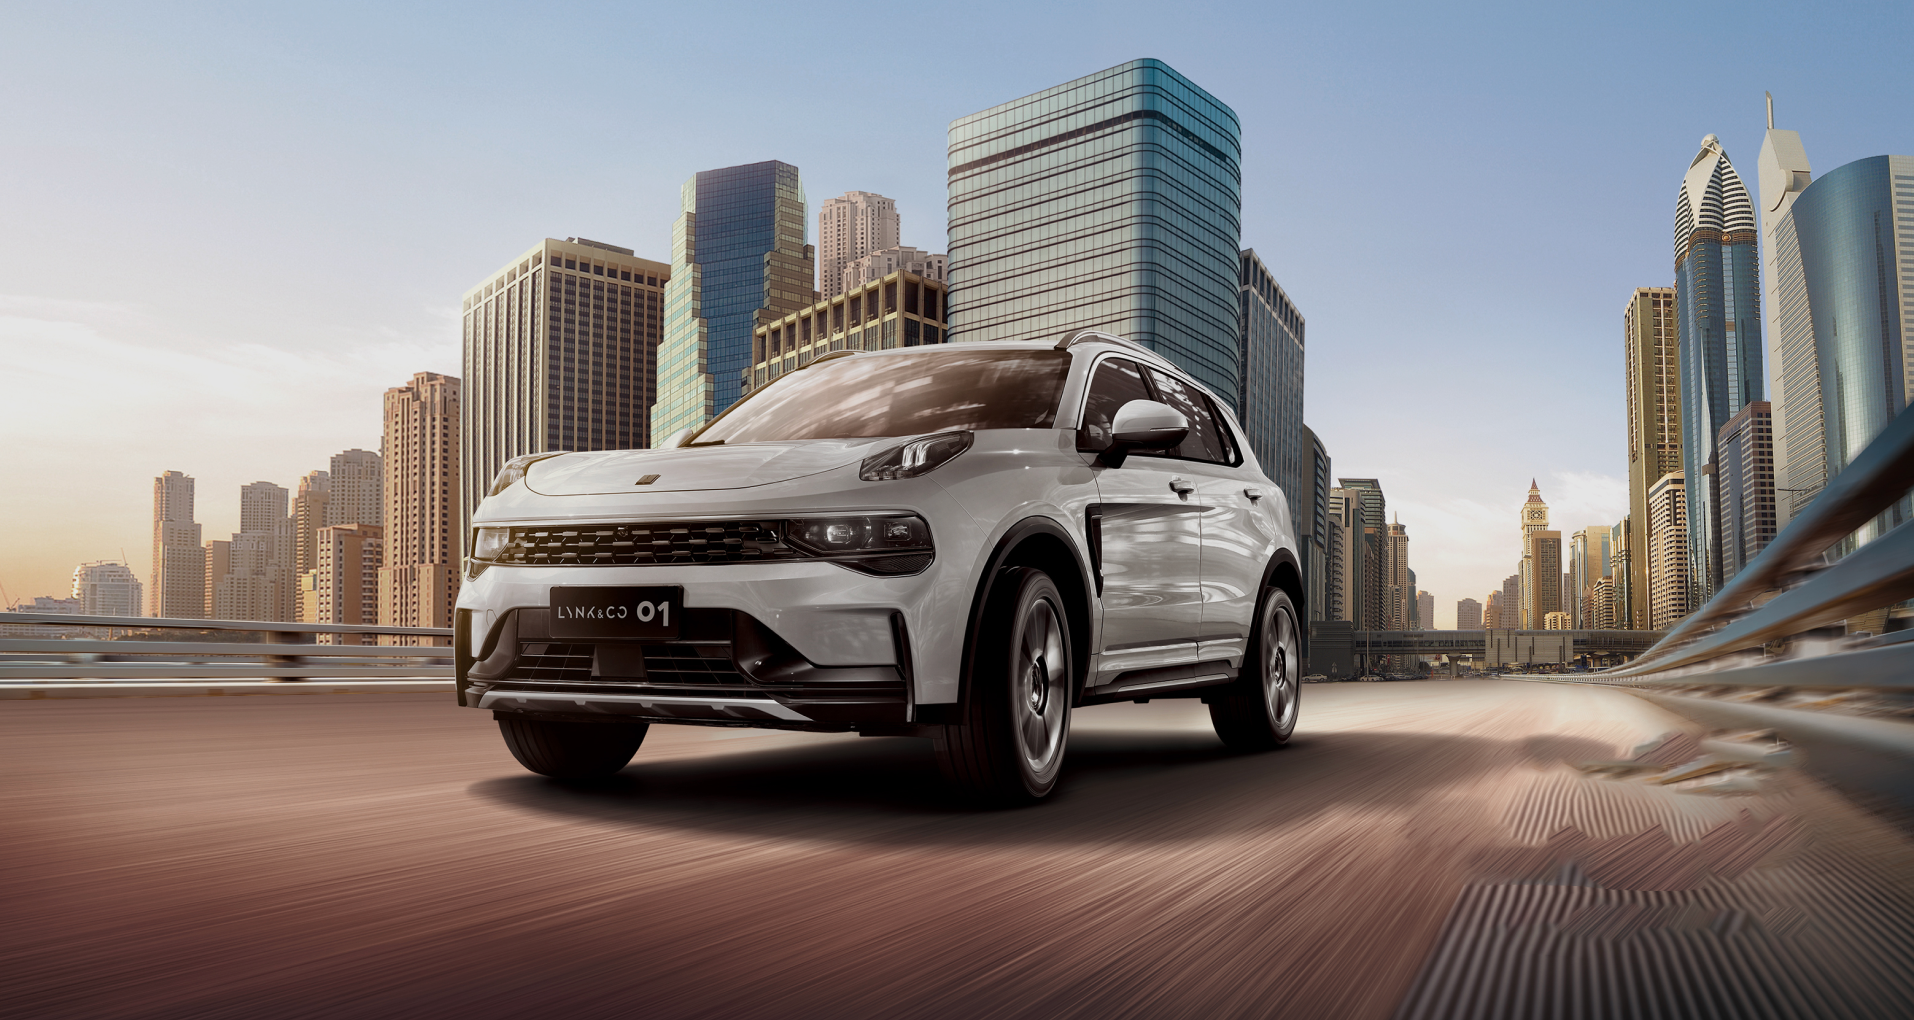 lynk-co-products-are-developed-by-cevt-china-euro-vehicle-technology-ab-in-sweden-3